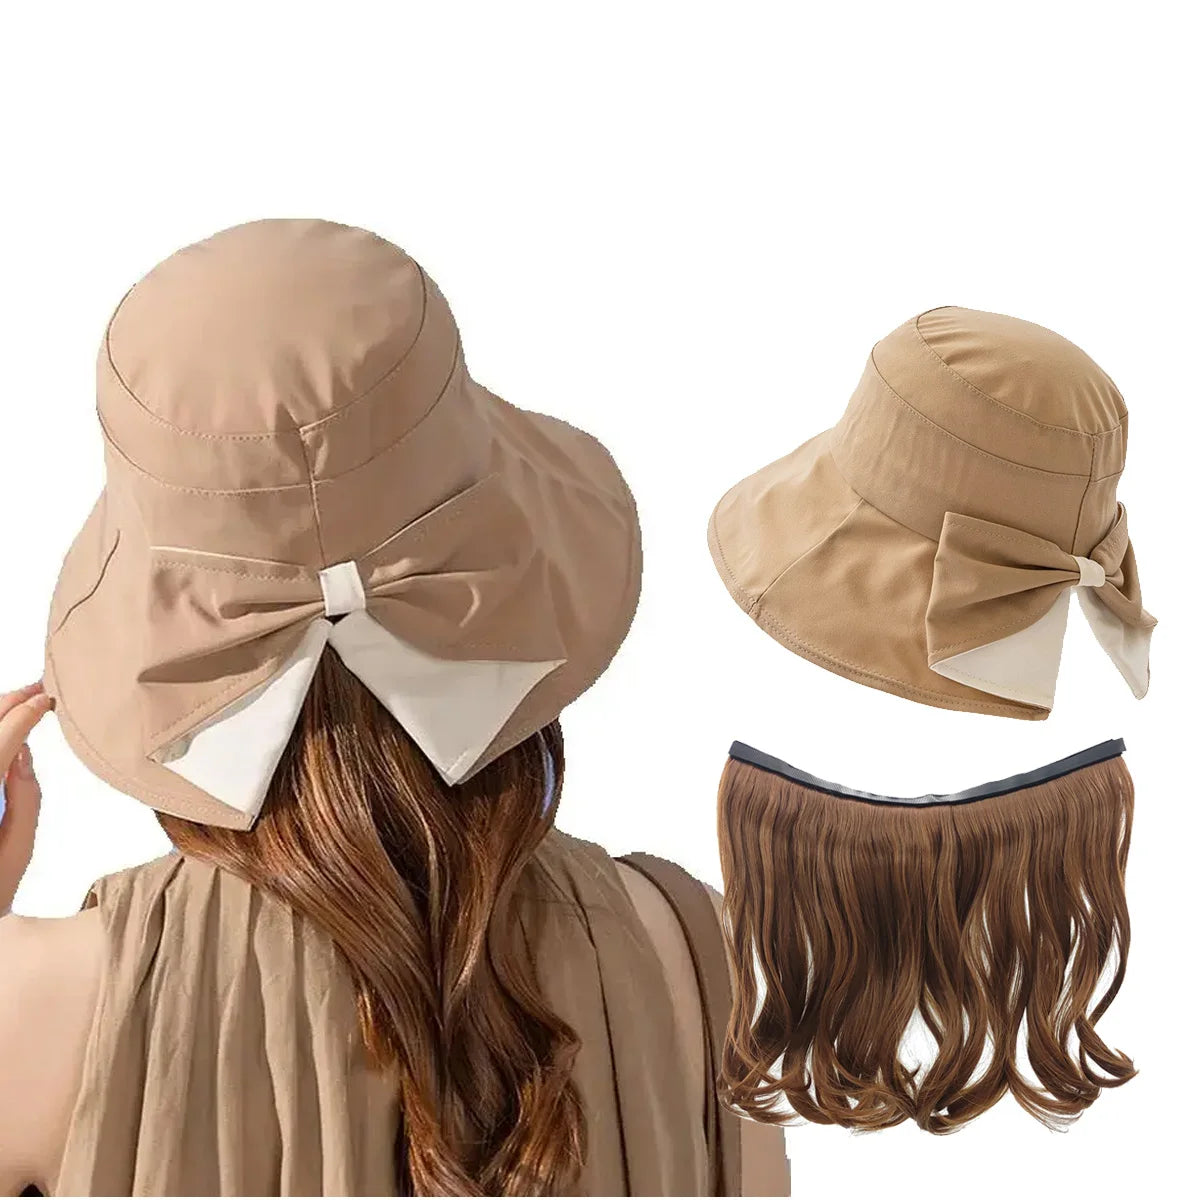 Femlion Long Wavy Blonde Wig Hat with Large Brim for Women